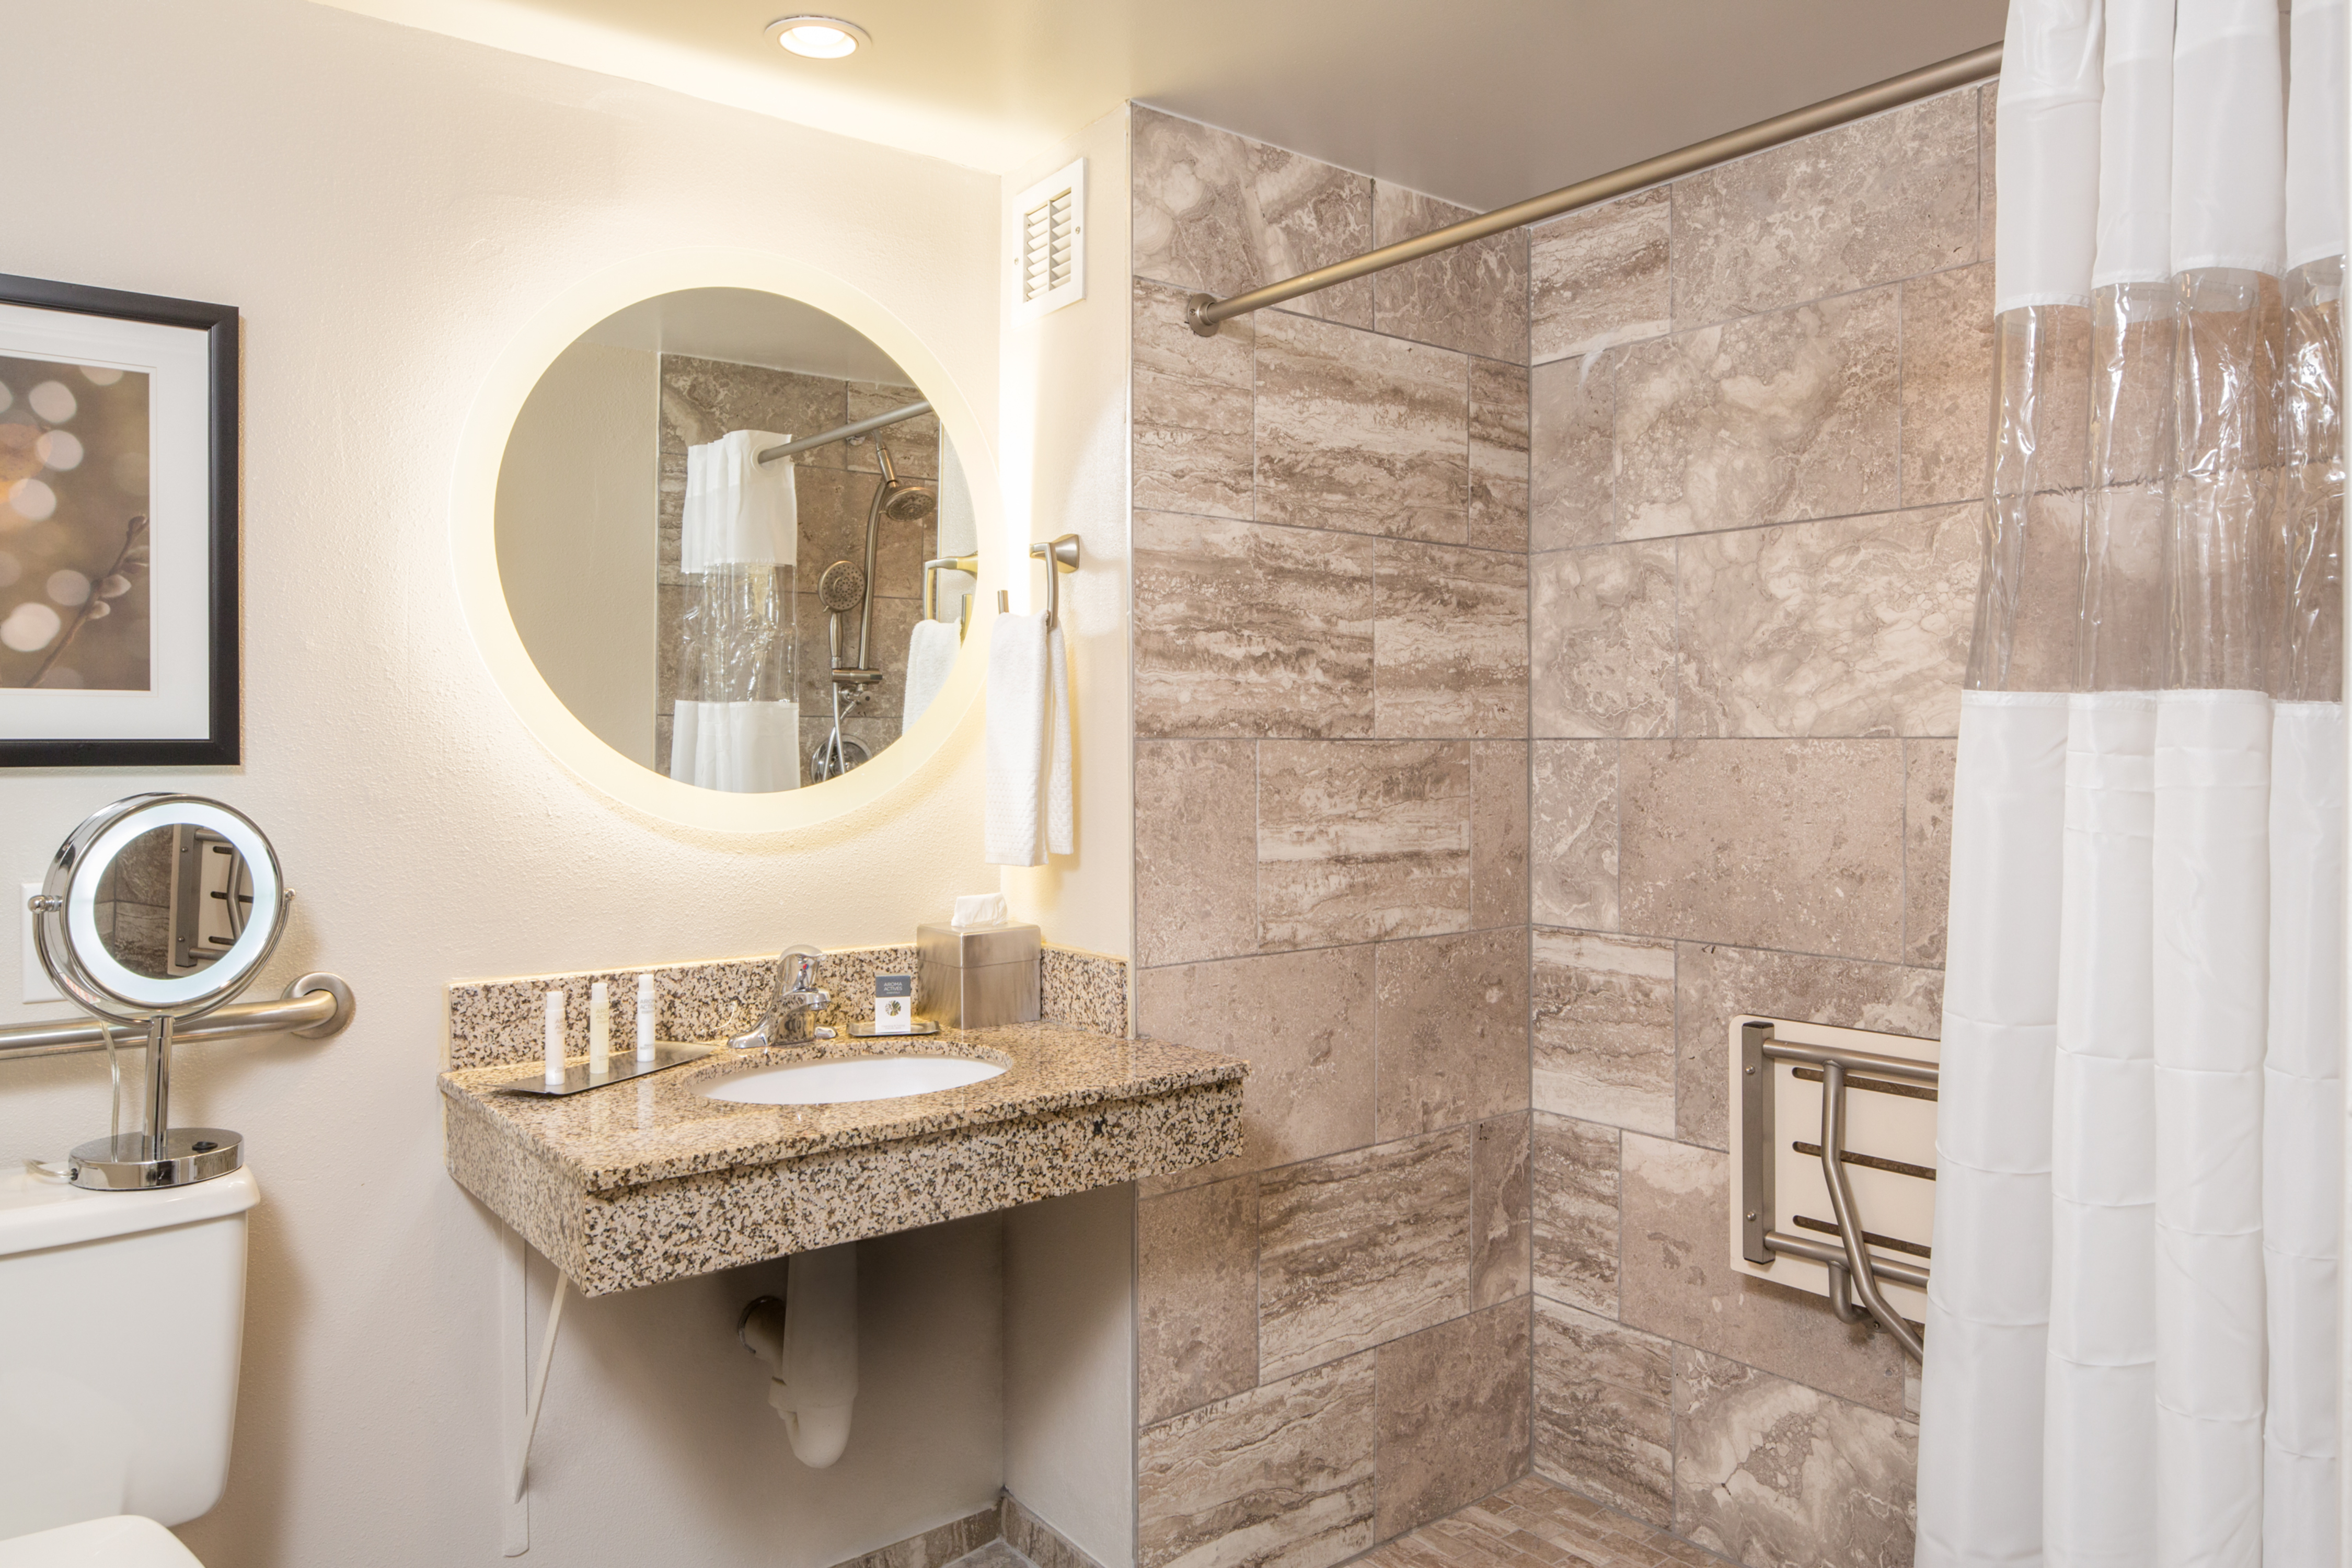 Wall Art Above Toilet With Grab Bars, Round Vanity Mirror, Sink, Toiletries, and Roll-In Shower With Shower Seat and Curtain in Accessible Bathroom